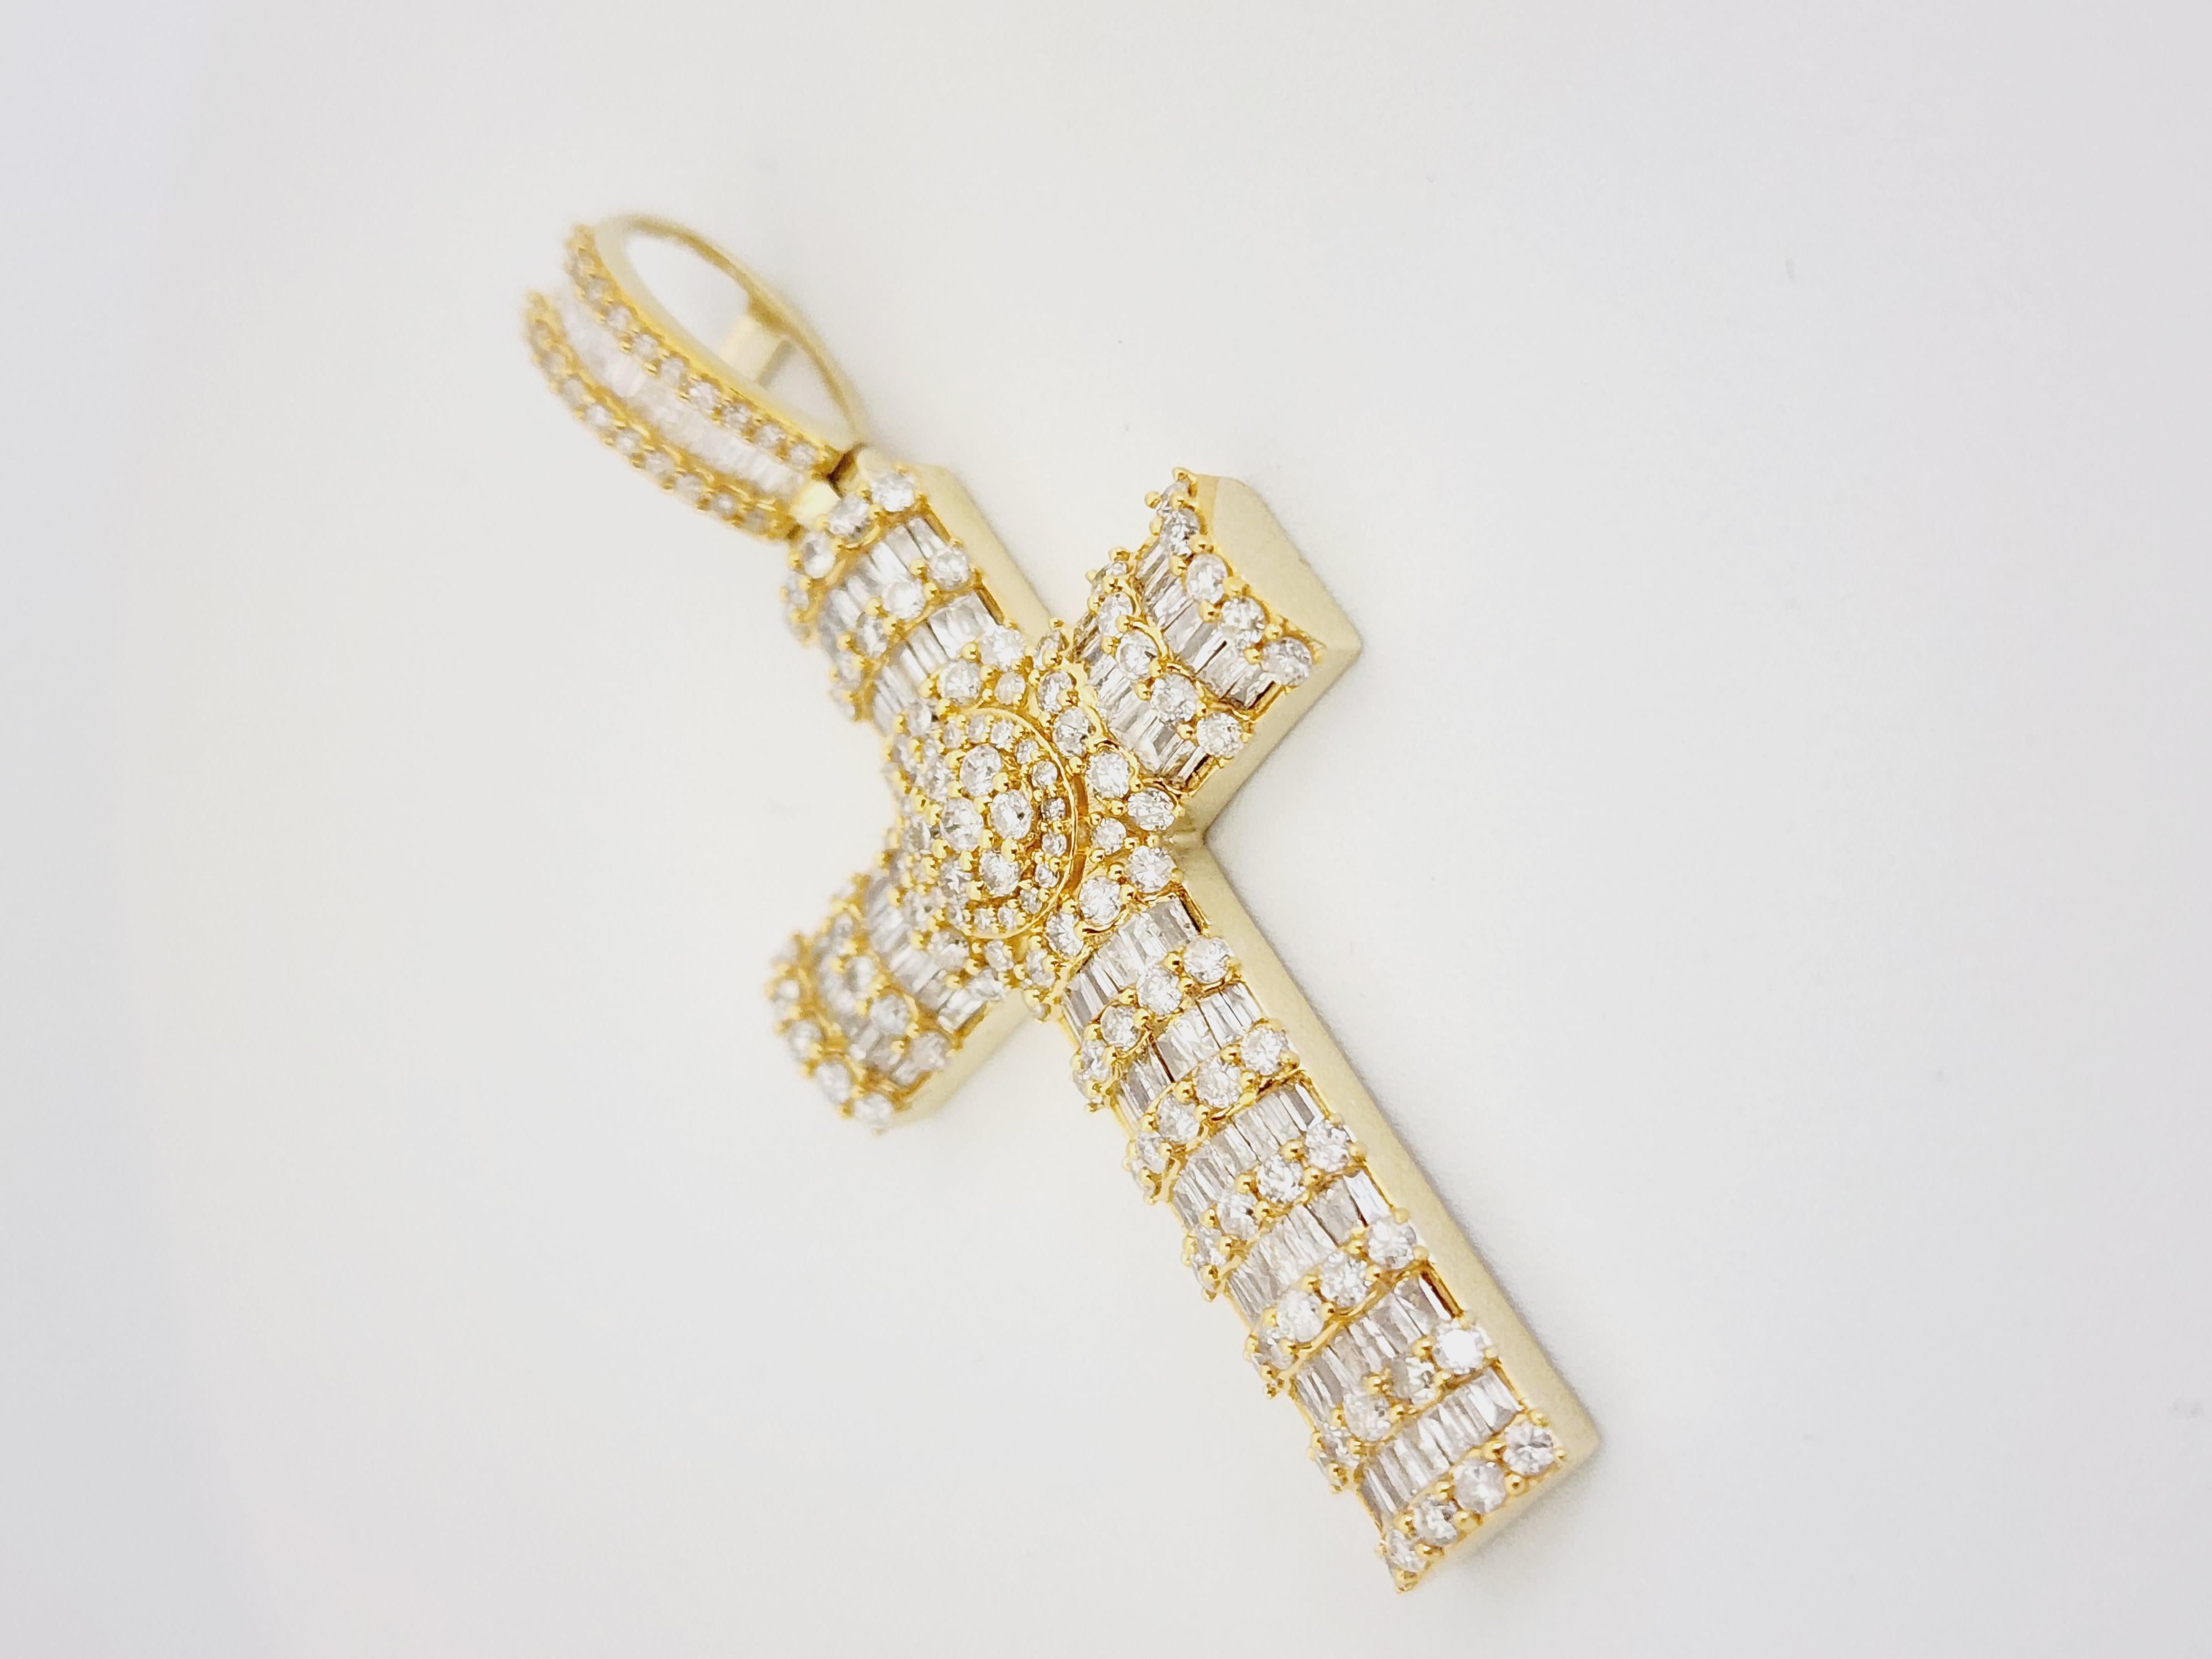 Beautiful 14K Yellow gold and diamond cross pendant. A total weight of 2.80 Carat natural diamonds very sparkly and shiny look. 

(Pendant Only)